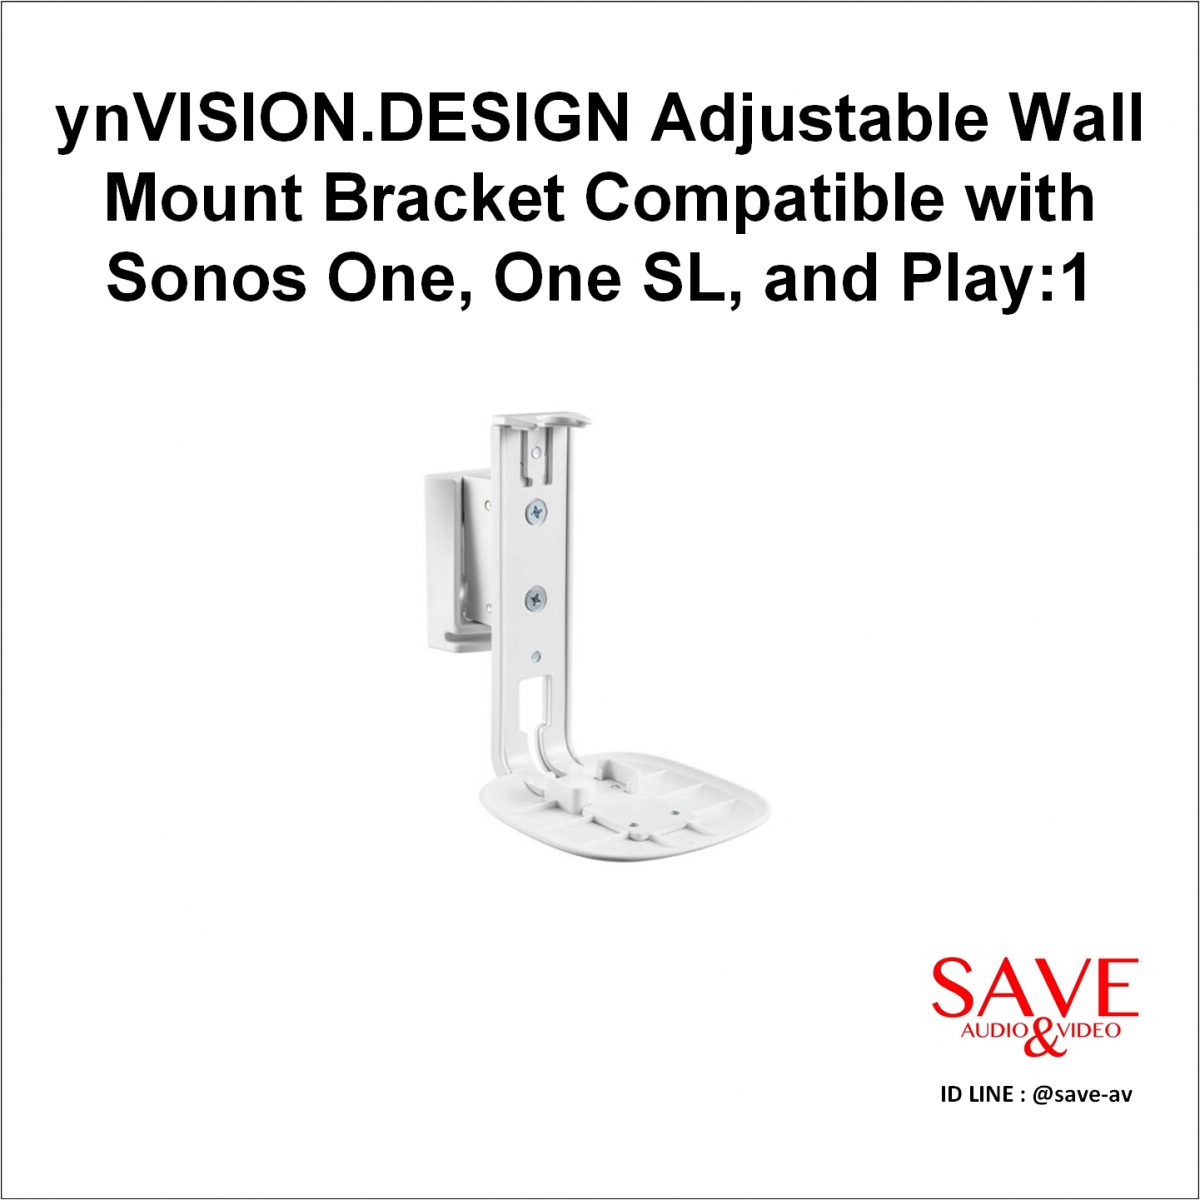 ynVISION.DESIGN Adjustable Wall Mount Bracket Compatible with Sonos One, One SL, and Play1-w